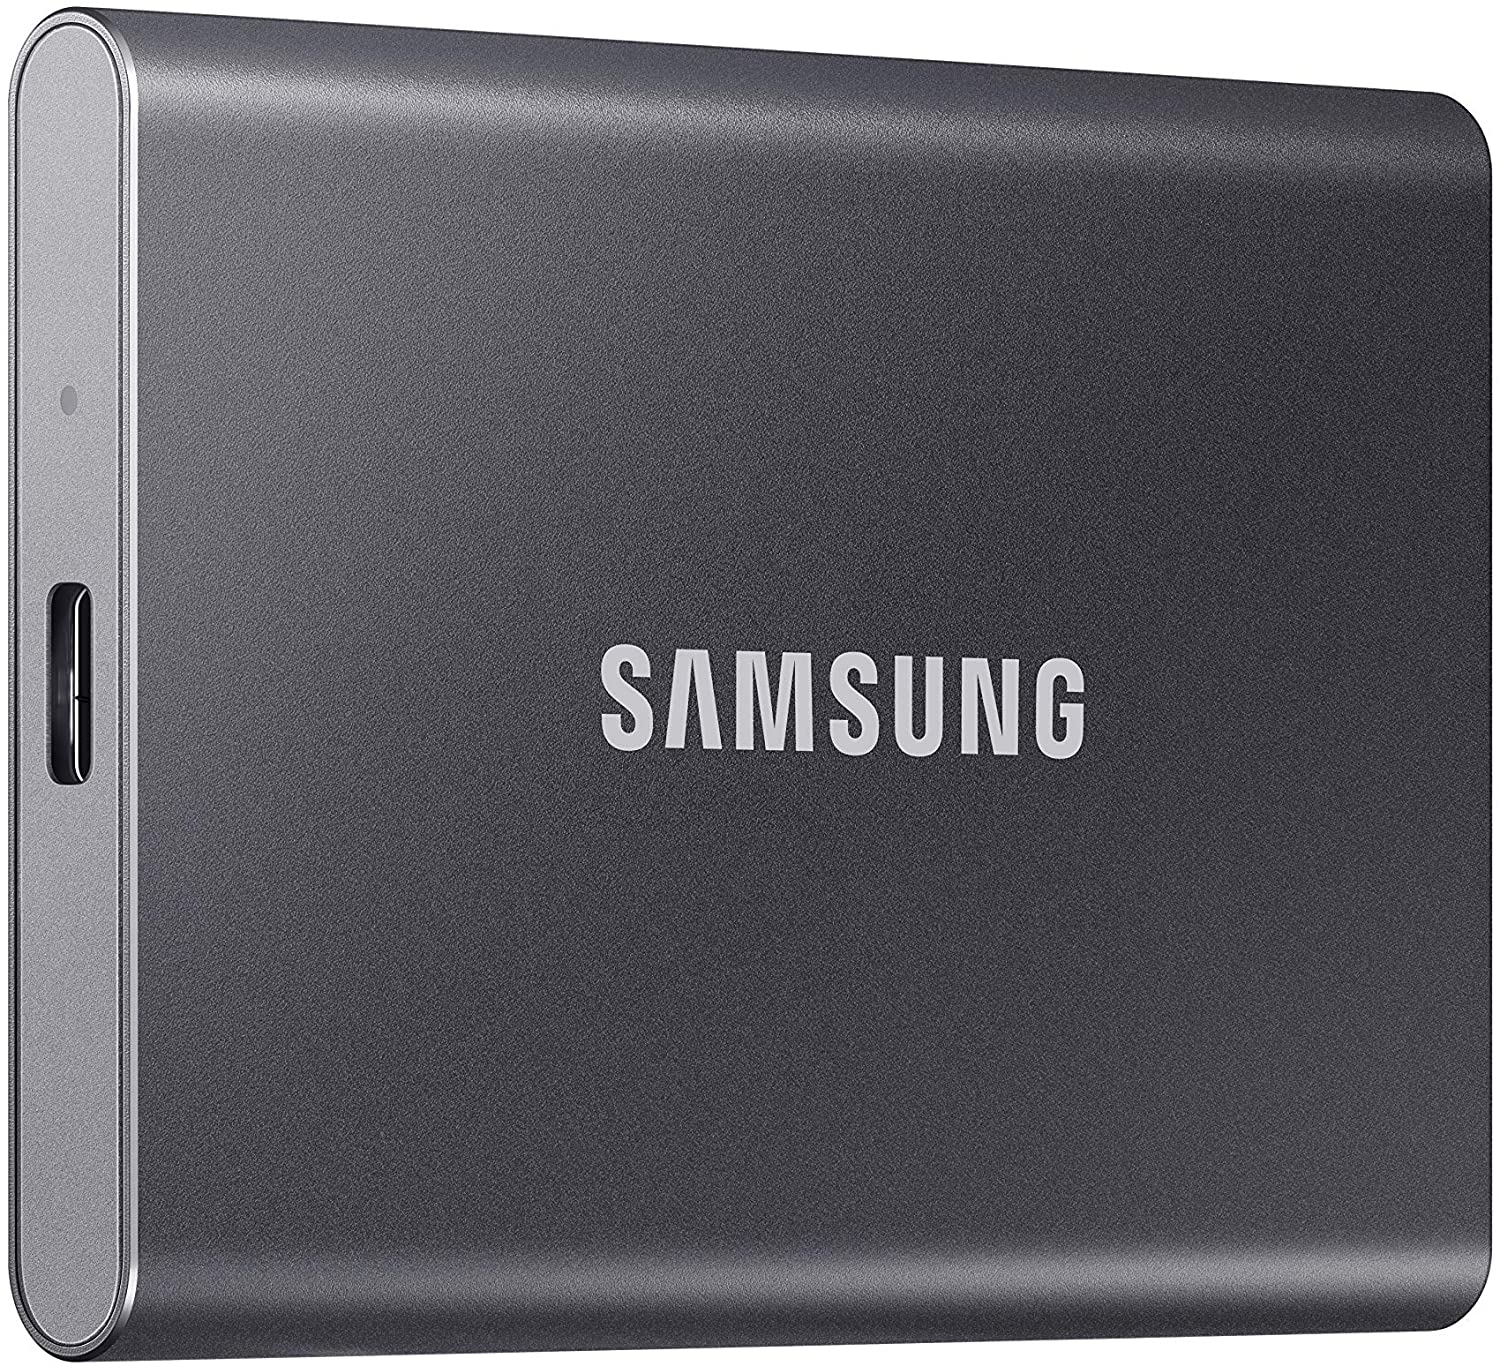 Samsung T7 Portable SSD 2TB - Up to 1050MB/s - USB 3.2 External Solid State Drive, Gray, Blue, or Red $219.99